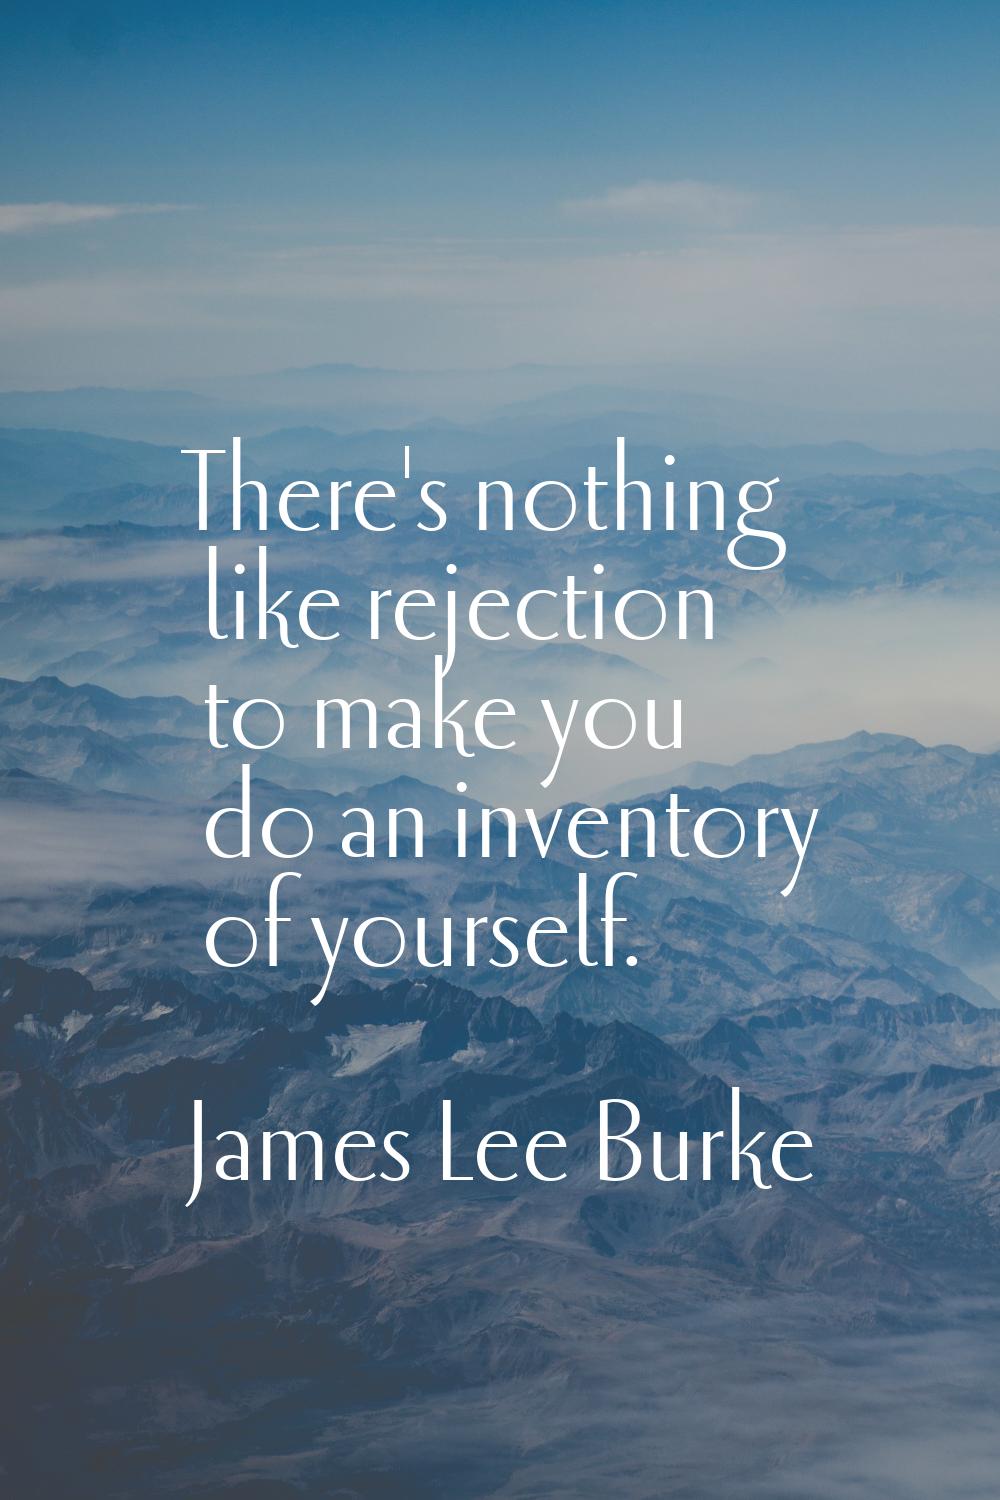 There's nothing like rejection to make you do an inventory of yourself.